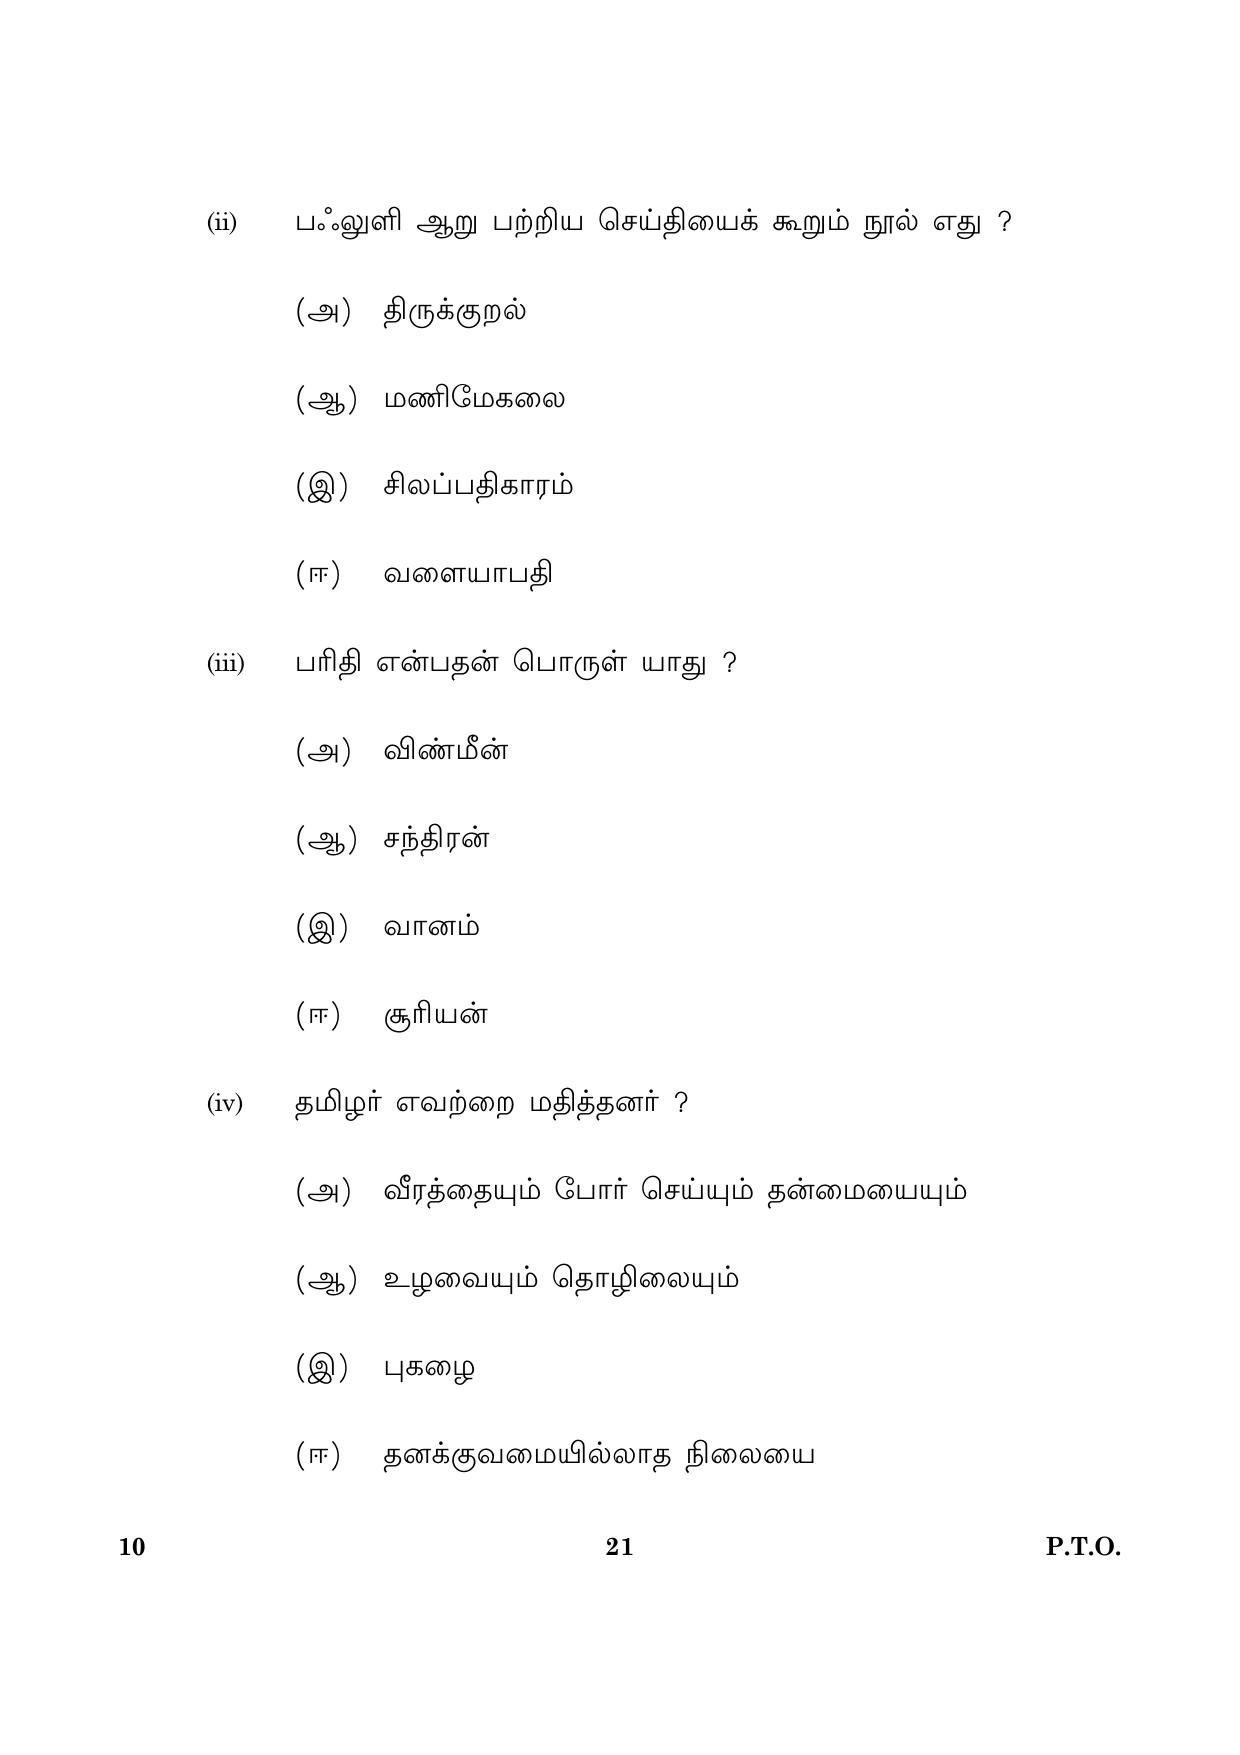 CBSE Class 10 010 Tamil 2016 Question Paper - Page 21